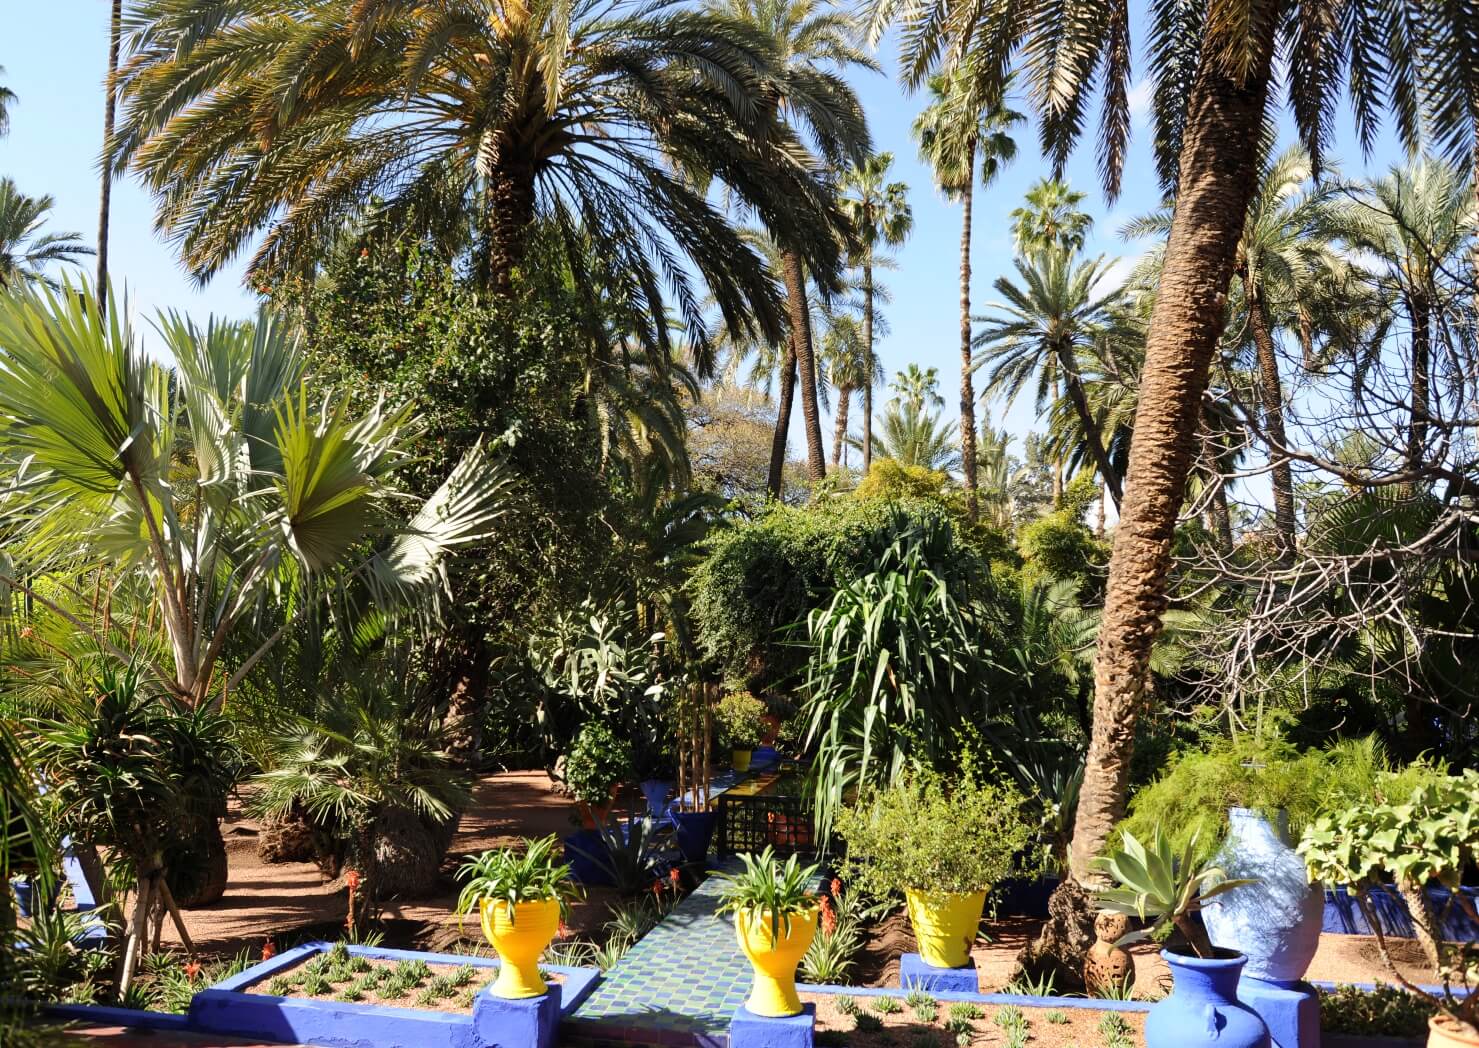 Tour of Marrakech by horse-drawn carriage: Gardens and ramparts